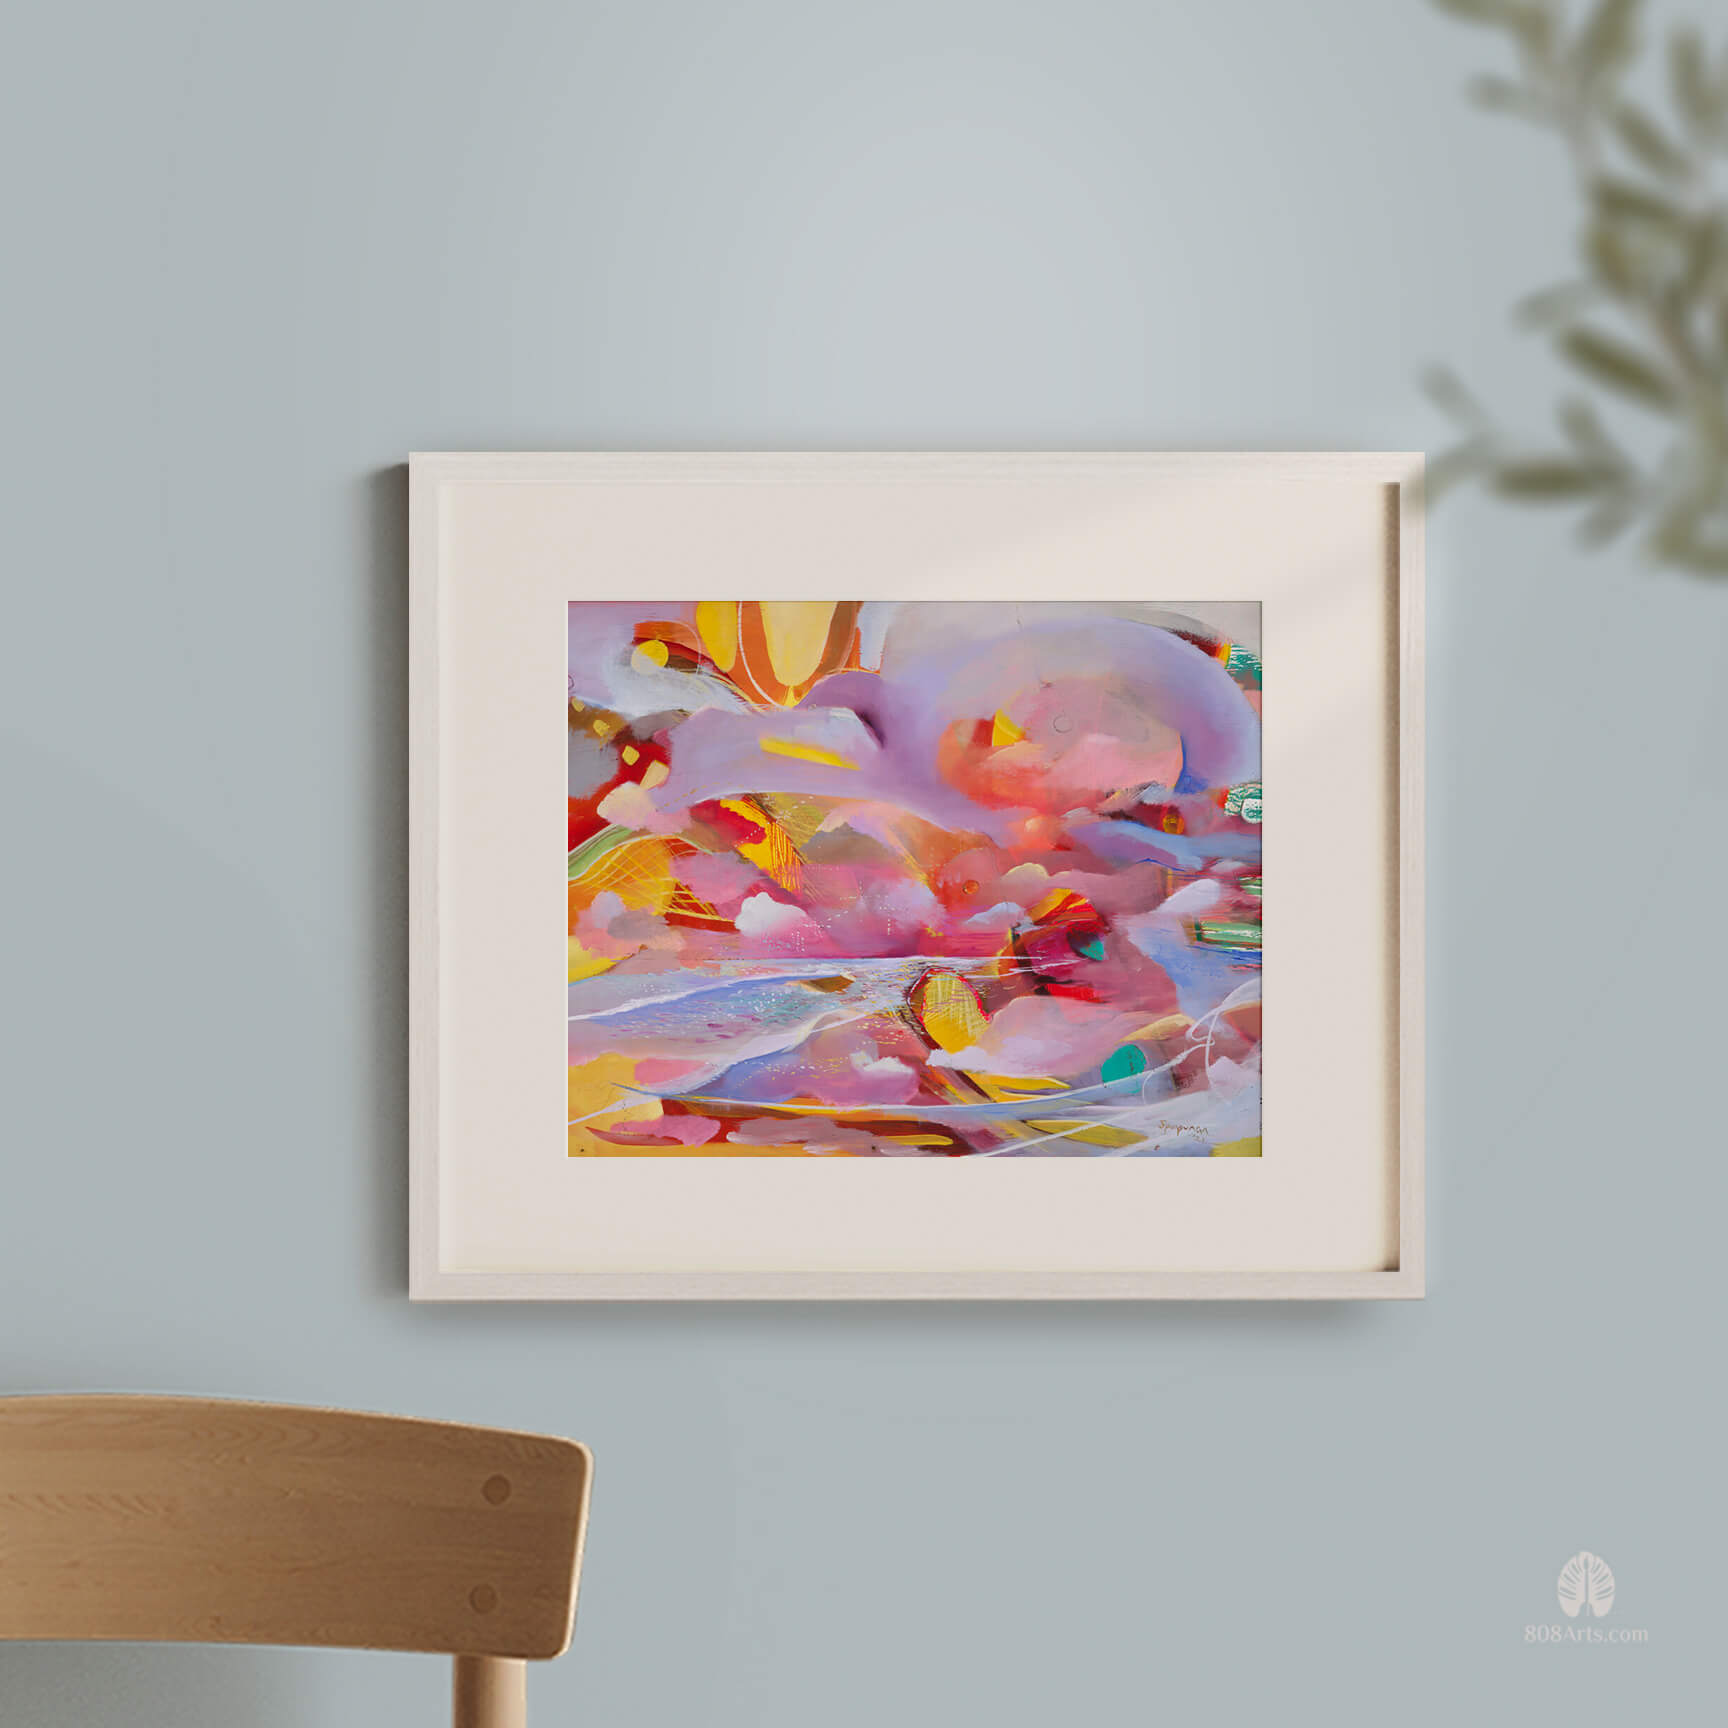 Colorful abstract matted art print by Hawaii artist Saumolia in white frame on a blue wall